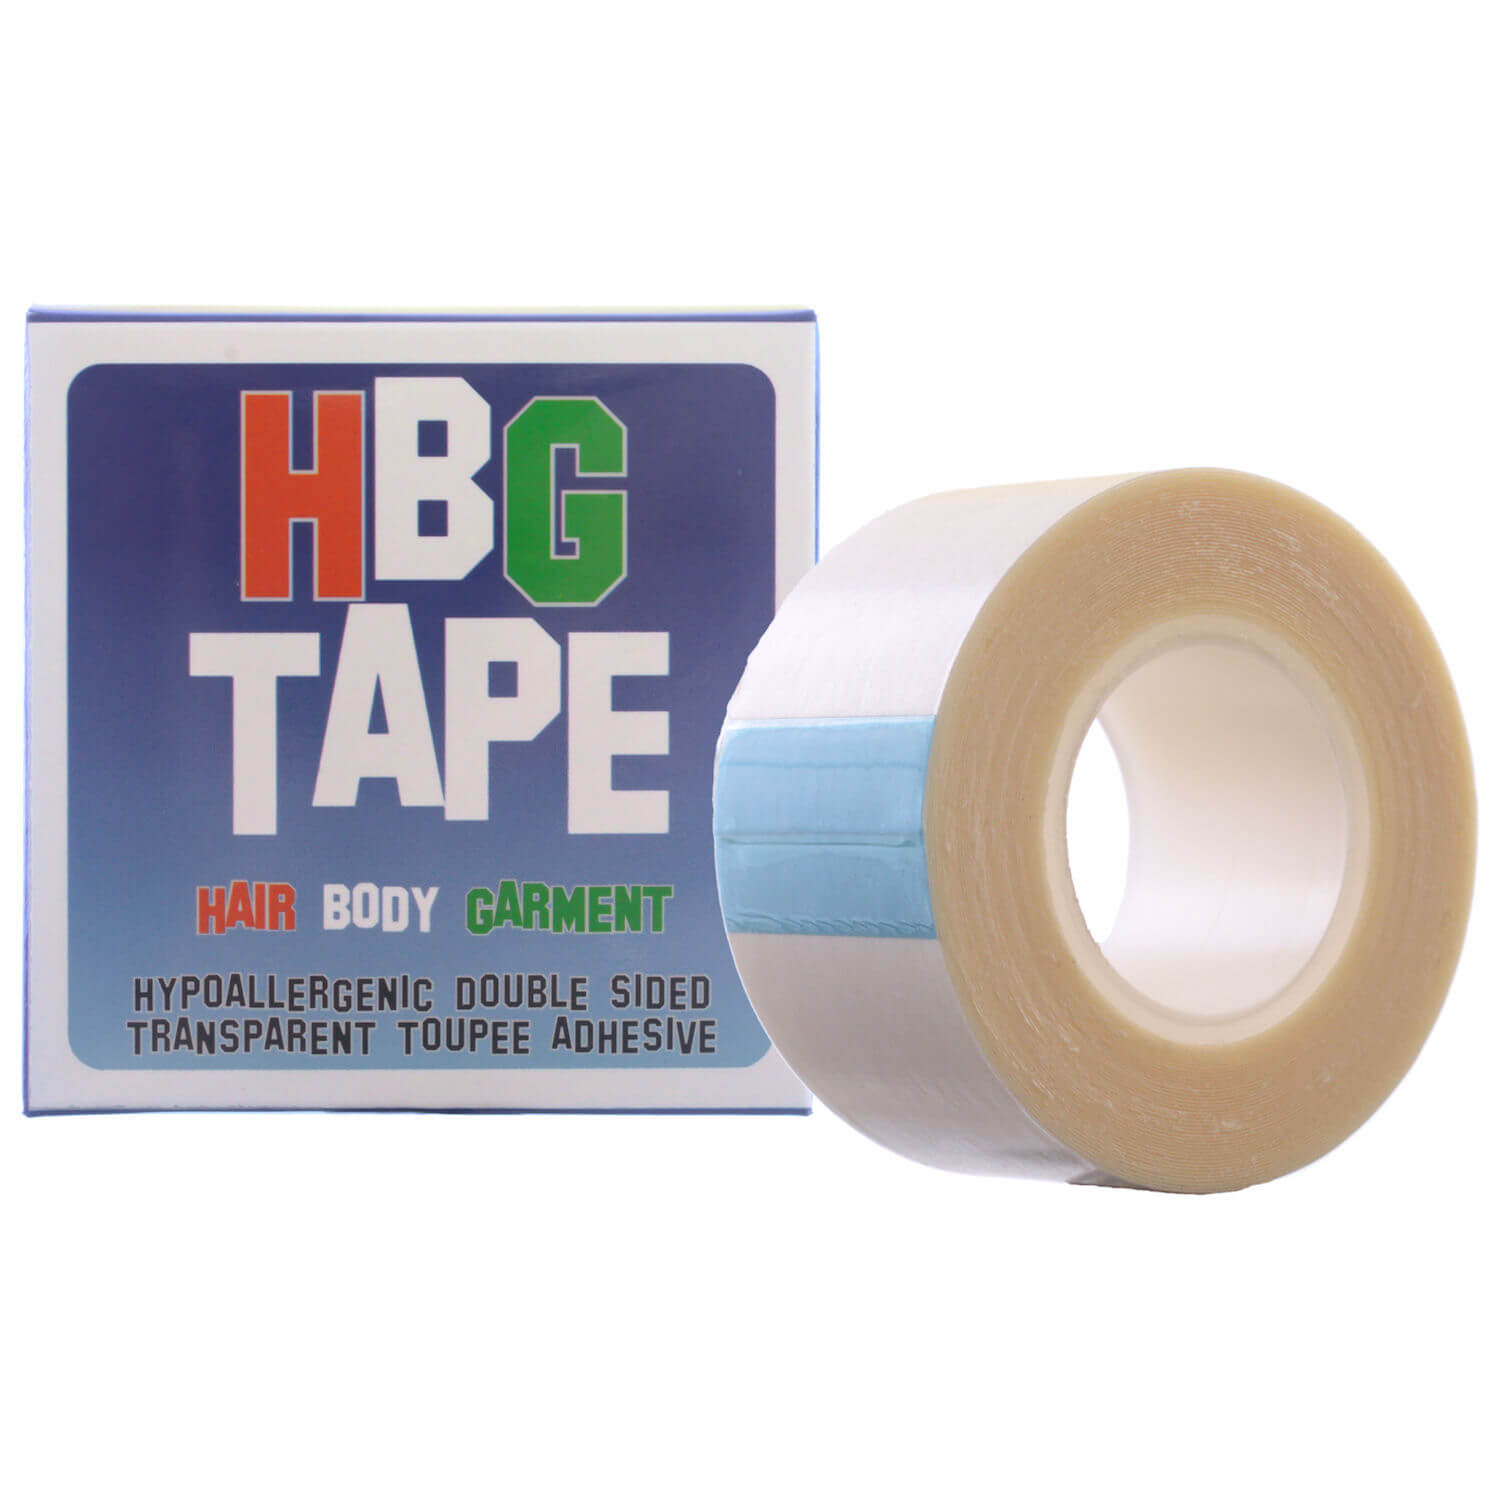 HBG Tape (Hair, Body and Garment) Wig & Toupee Adhesive 5m roll x